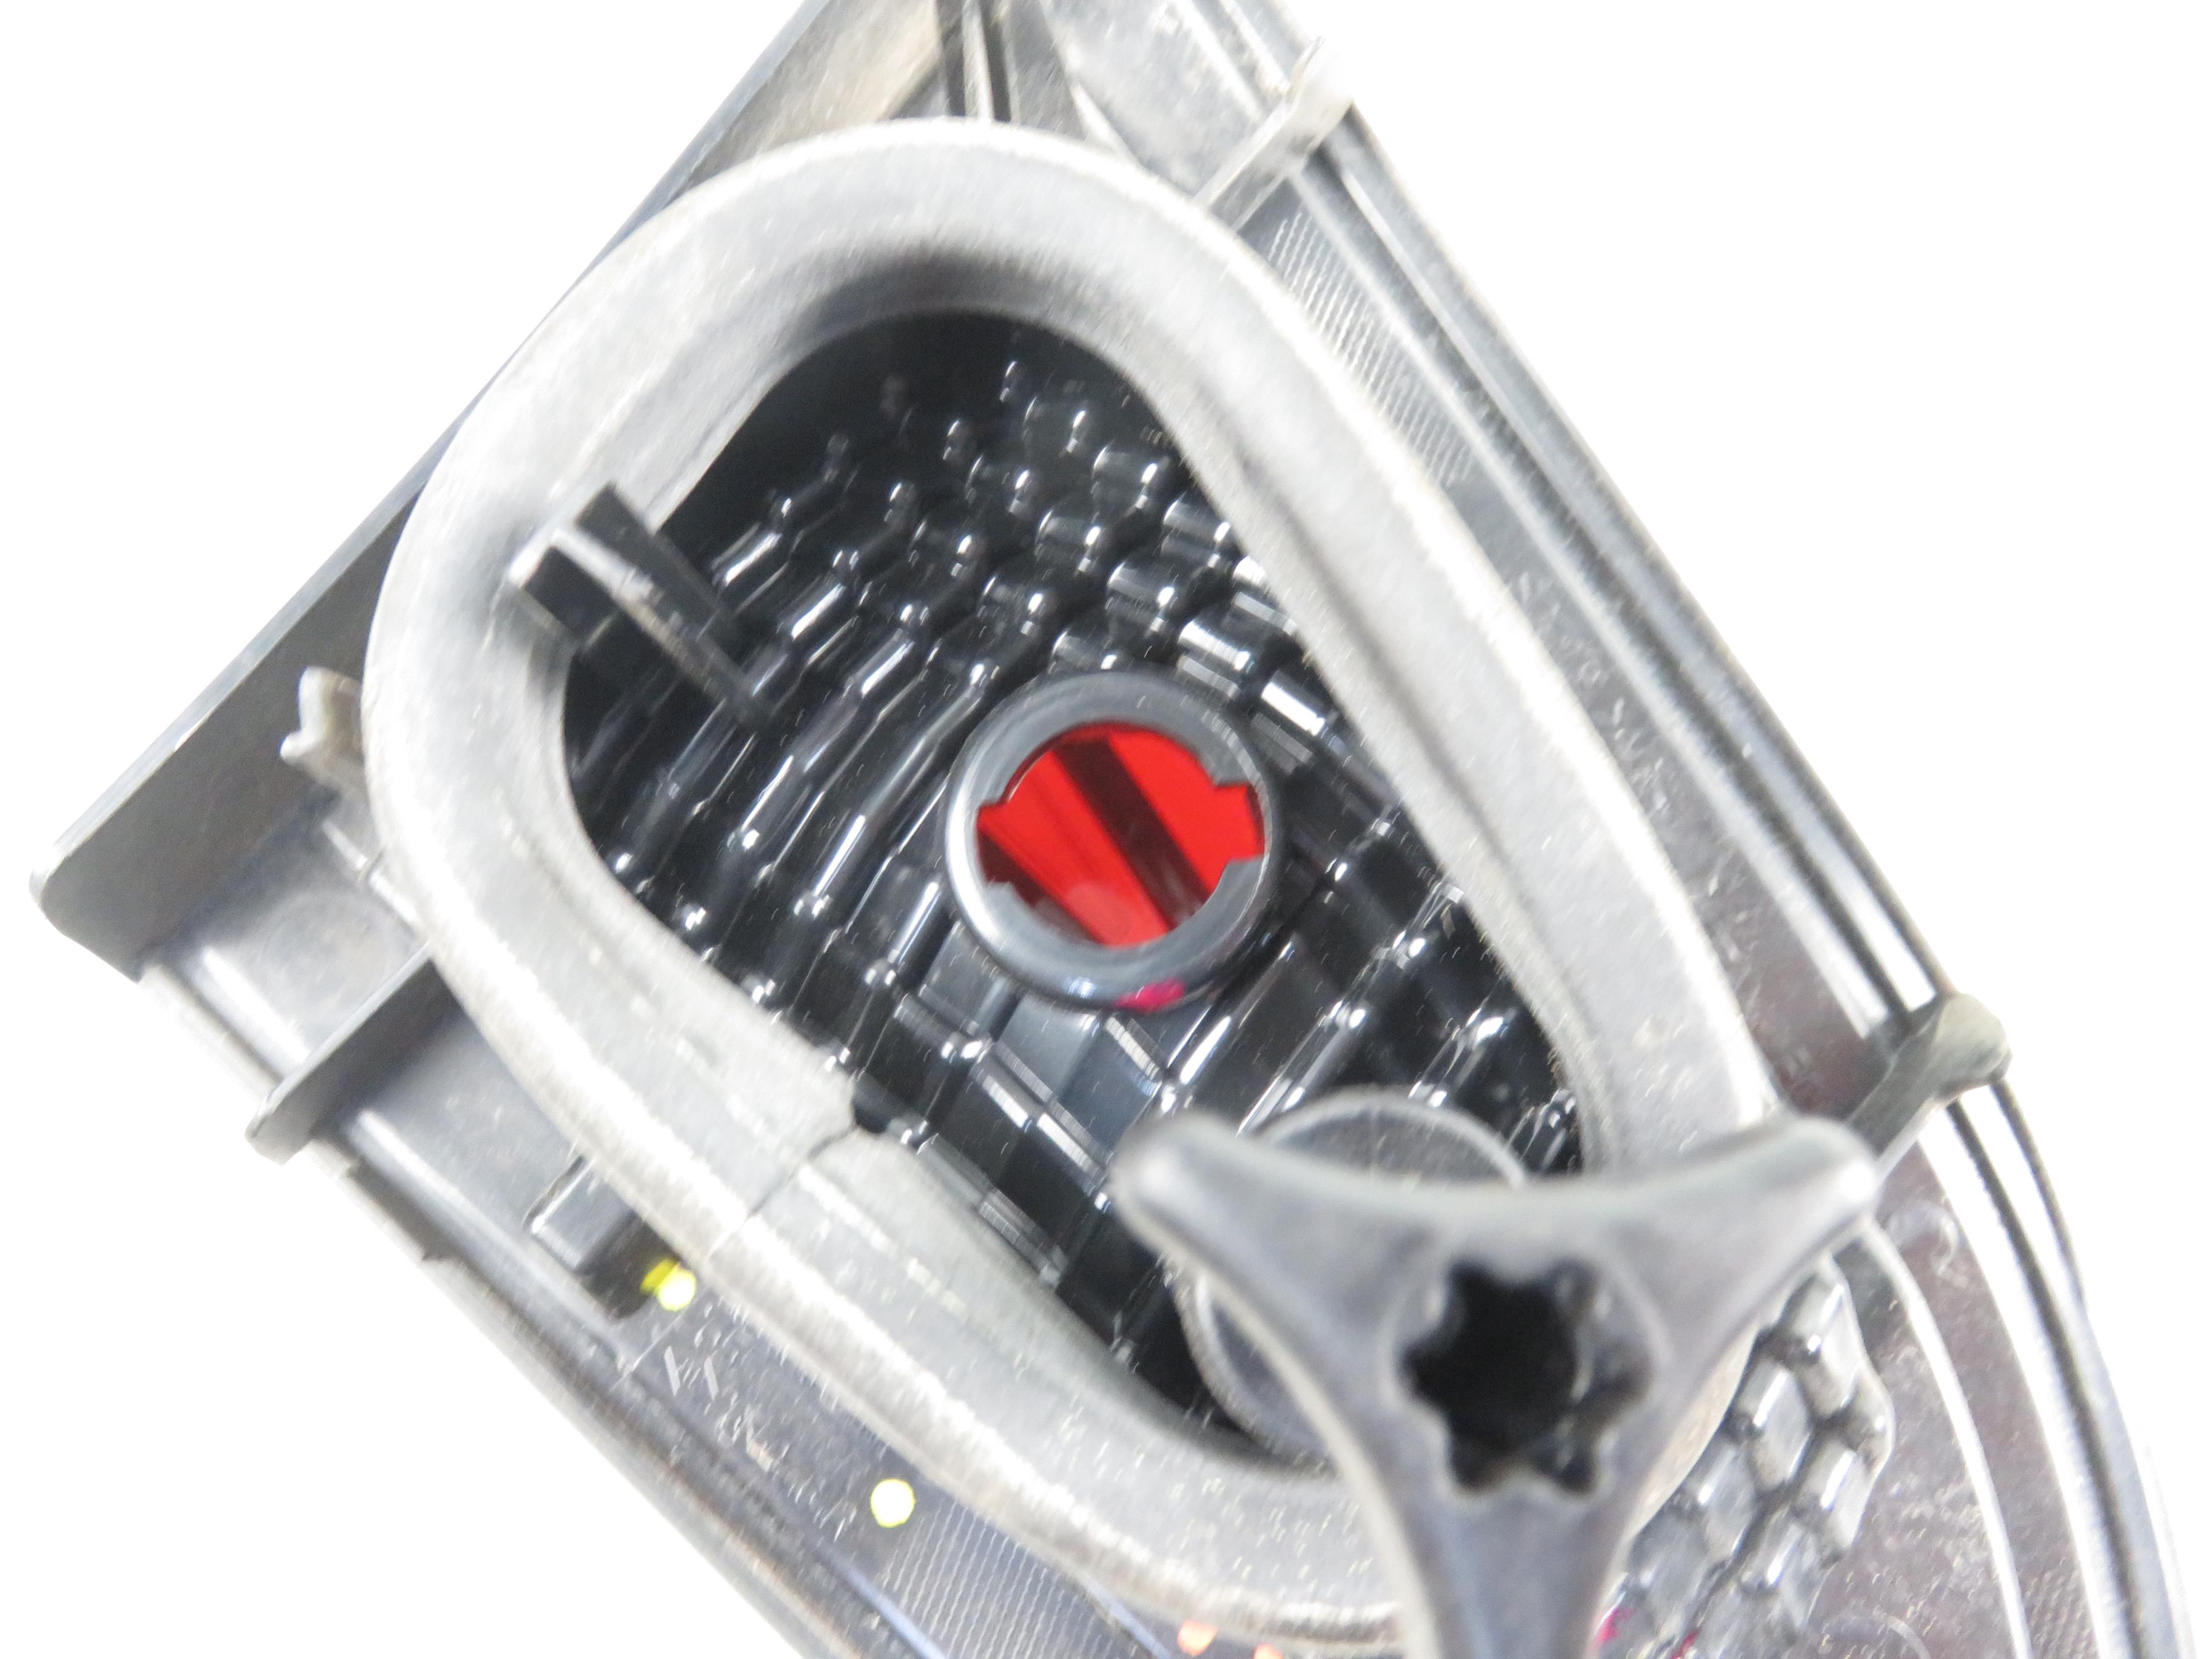 RENAULT Scenic 3 generation (2009-2015) Rear Right Taillight Lamp 265550018R, 265507464R 17799708